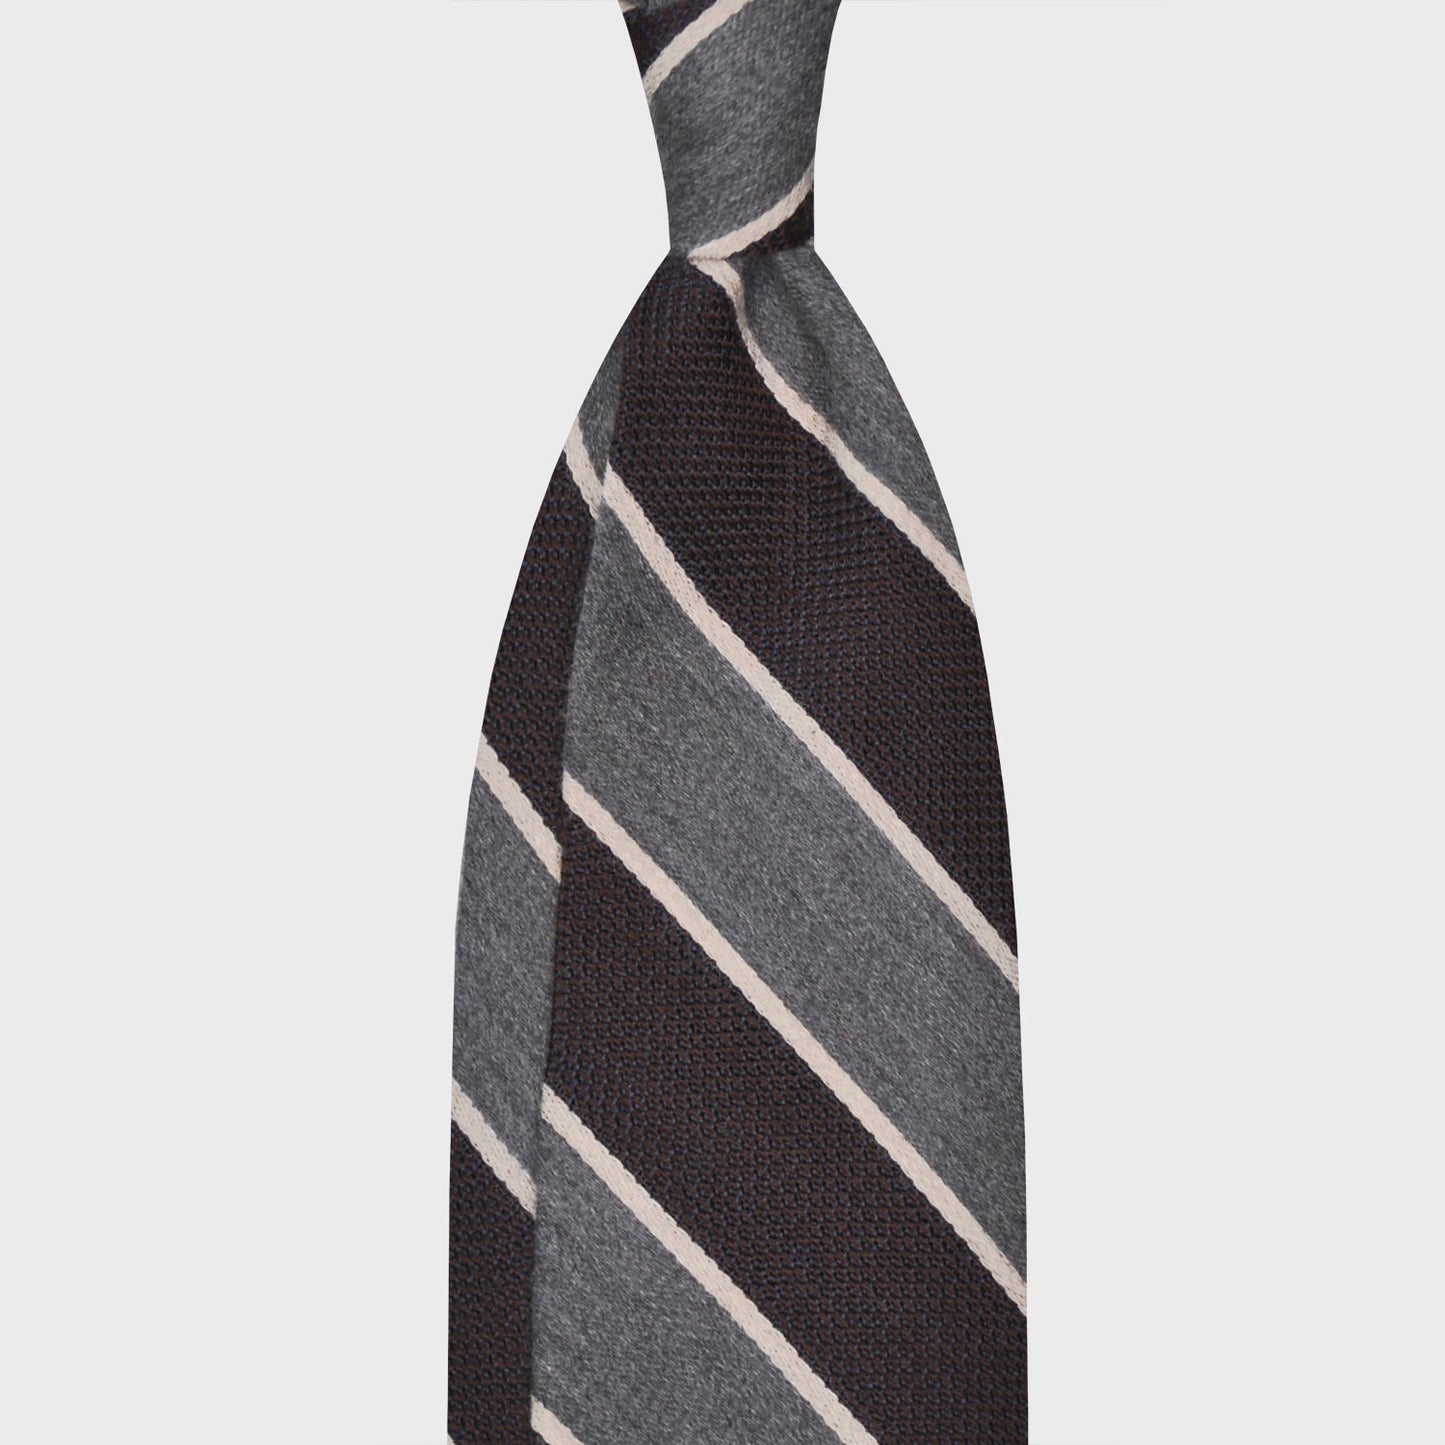 Silk Wool Regimental Tie Brown Grey Striped. Exclusive regimental silk and wool necktie made with grenadine silk and soft merino wool, hand rolled edge, unlined 3 folds, smoke grey wool fabric, coffee brown grenadine silk fabric, ivory white silk, F.Marino Napoli for Wools Boutique Uomo